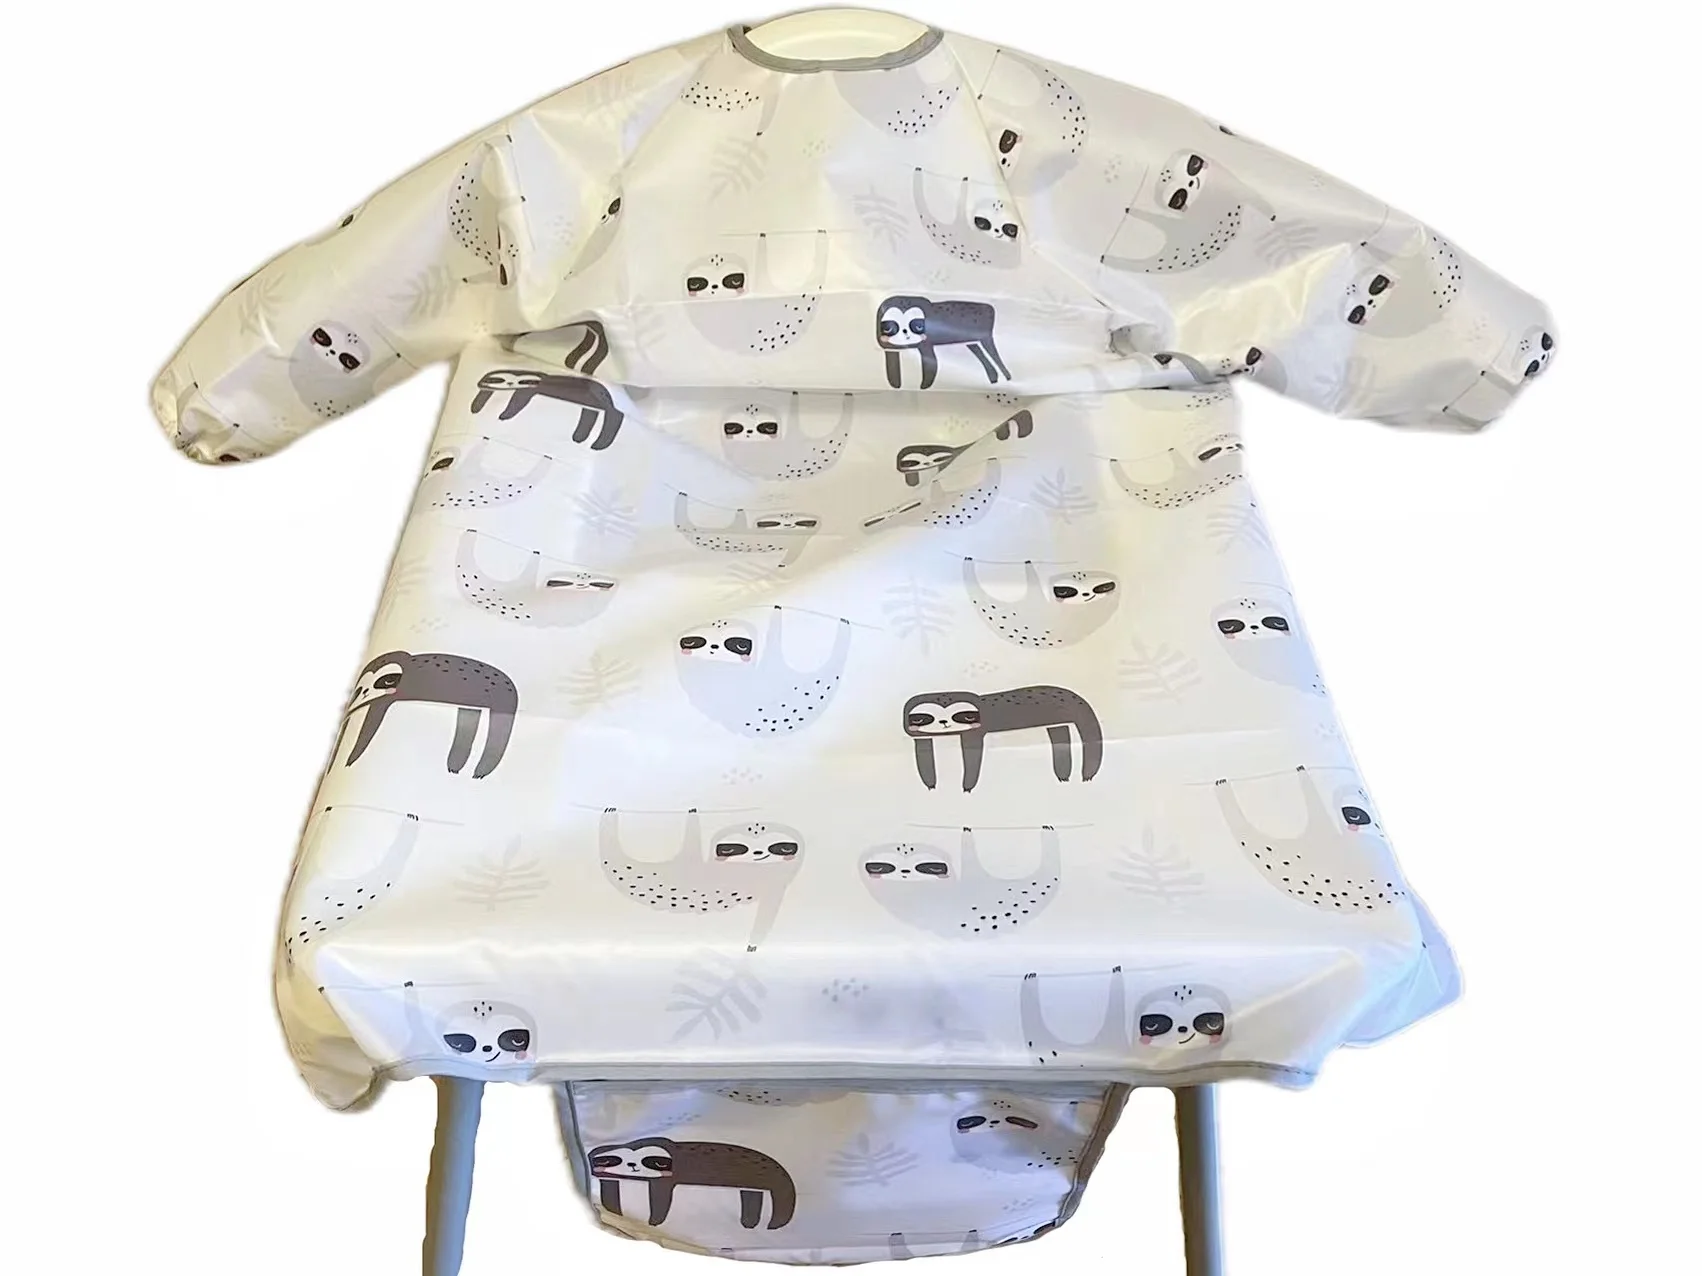 baby stroller accessories desk	 Two Colors X-Large Waterproof with sloth and doggy patterns Baby Highchair Bib with 2 Belts to Cover High Chair baby jogger double stroller accessories	